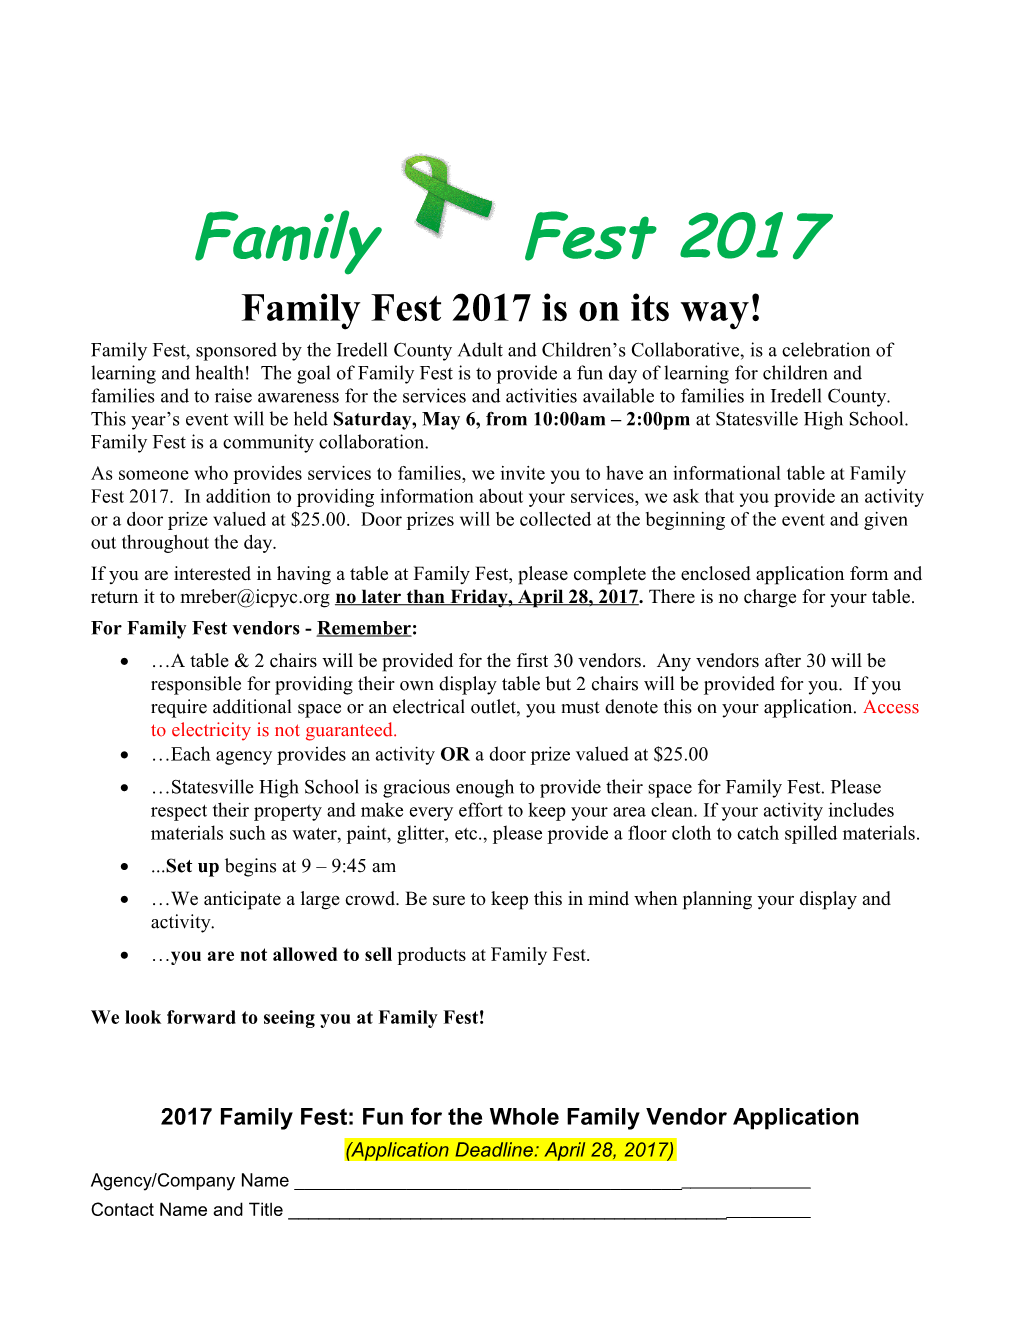 Family Fest 2017 Is on Its Way!